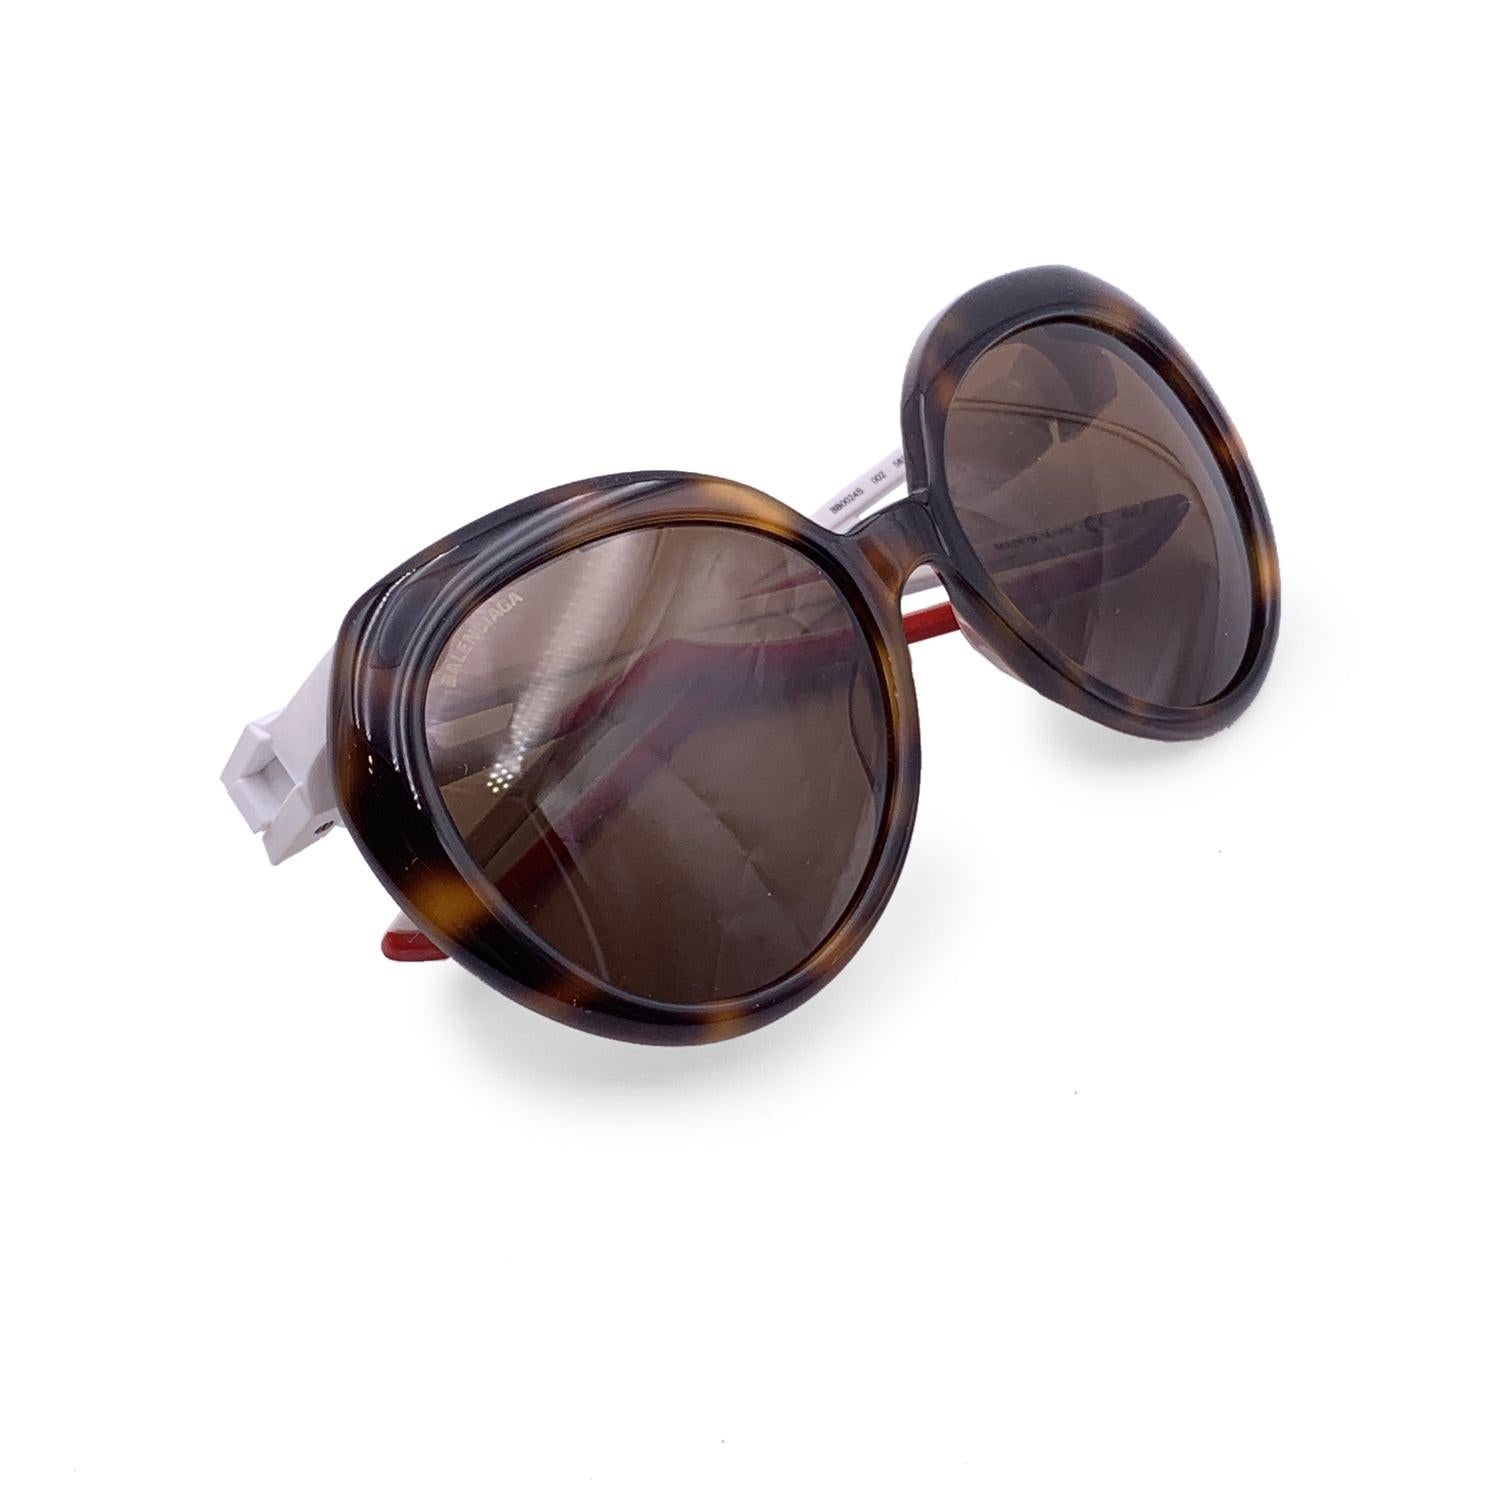 Balenciaga TripleS BB0024S sunglasses in color 002 brown. Oversizedbrown havana oval frame and brown lenses. White and red rubber effect temples with a black logo. Mod & refs: BB0024S - 002 - 58/19 - 135. Made in Italy Details MATERIAL: Plastic